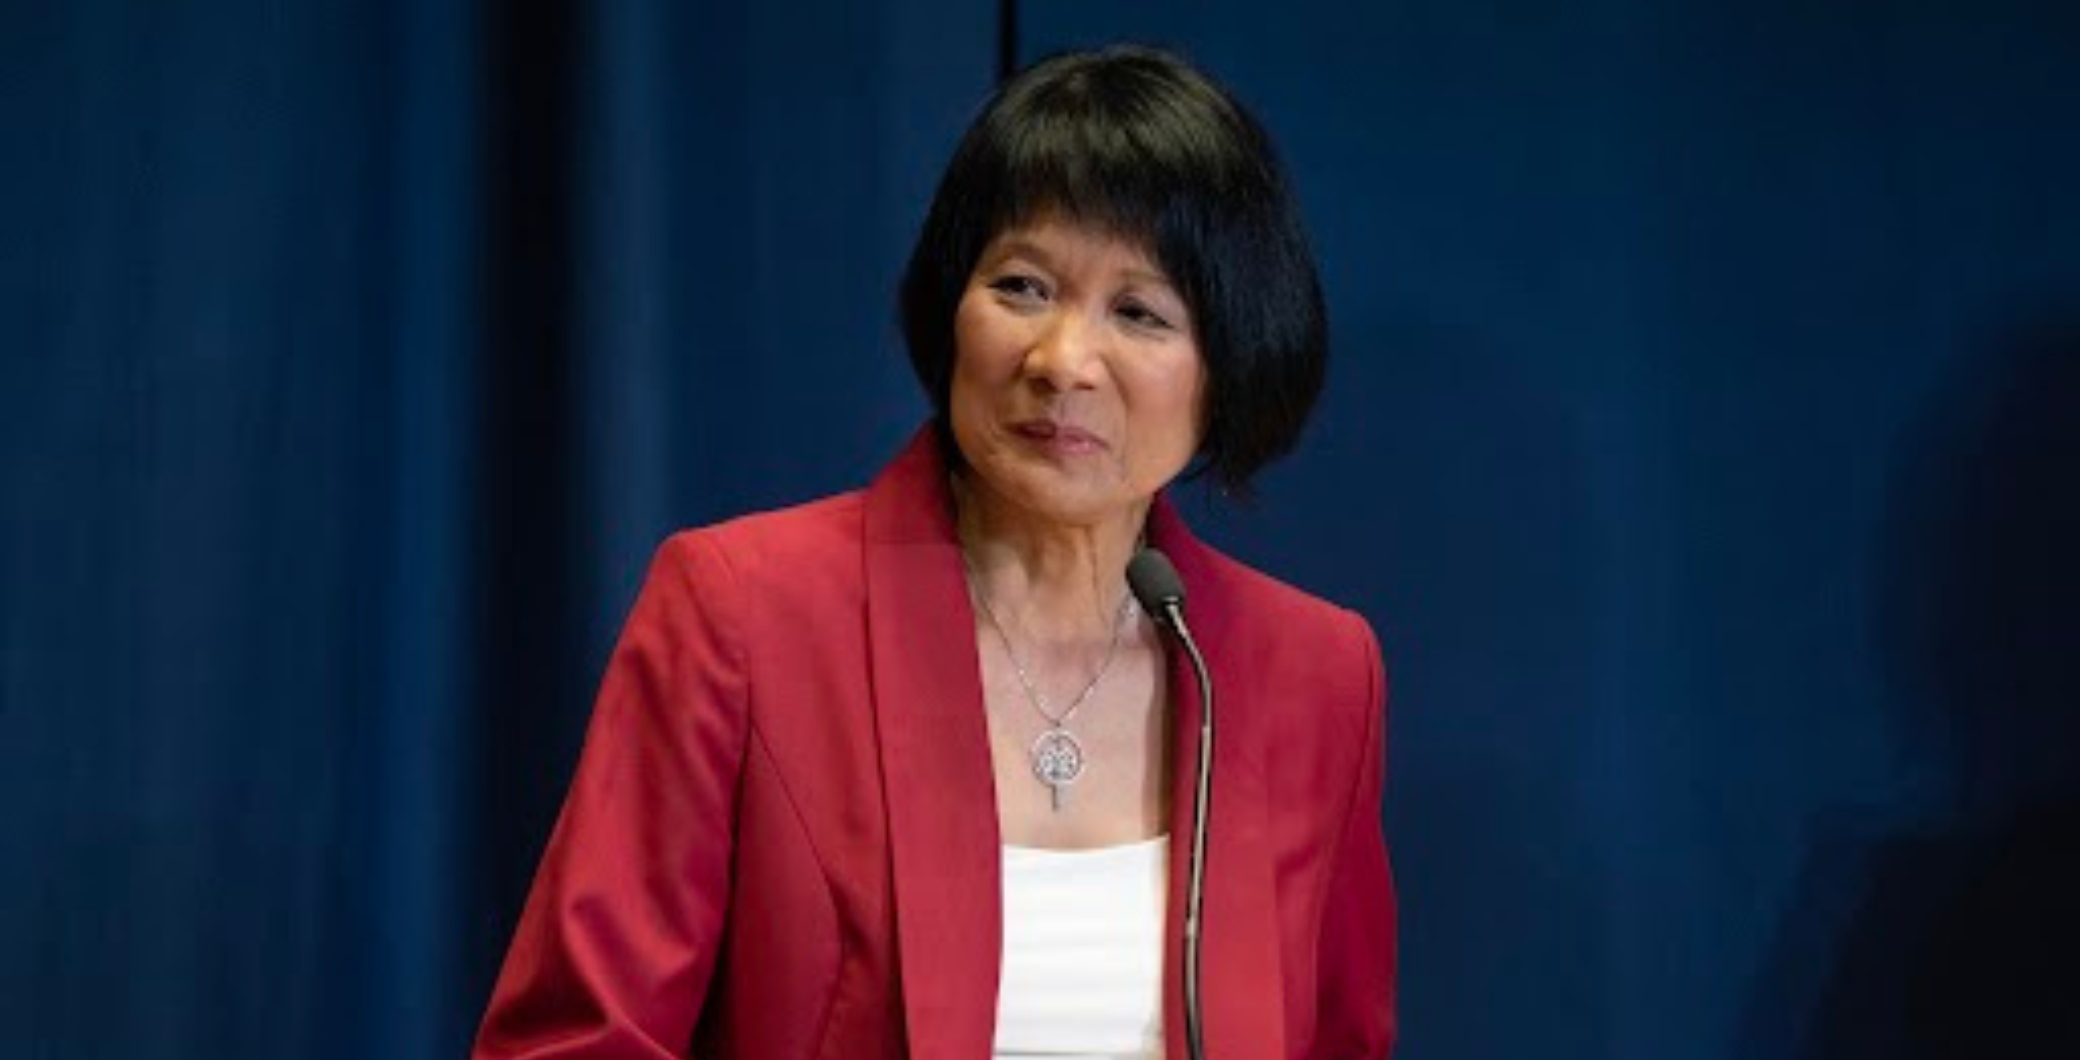 Mayoral candidates share thoughts on if Olivia Chow is elected